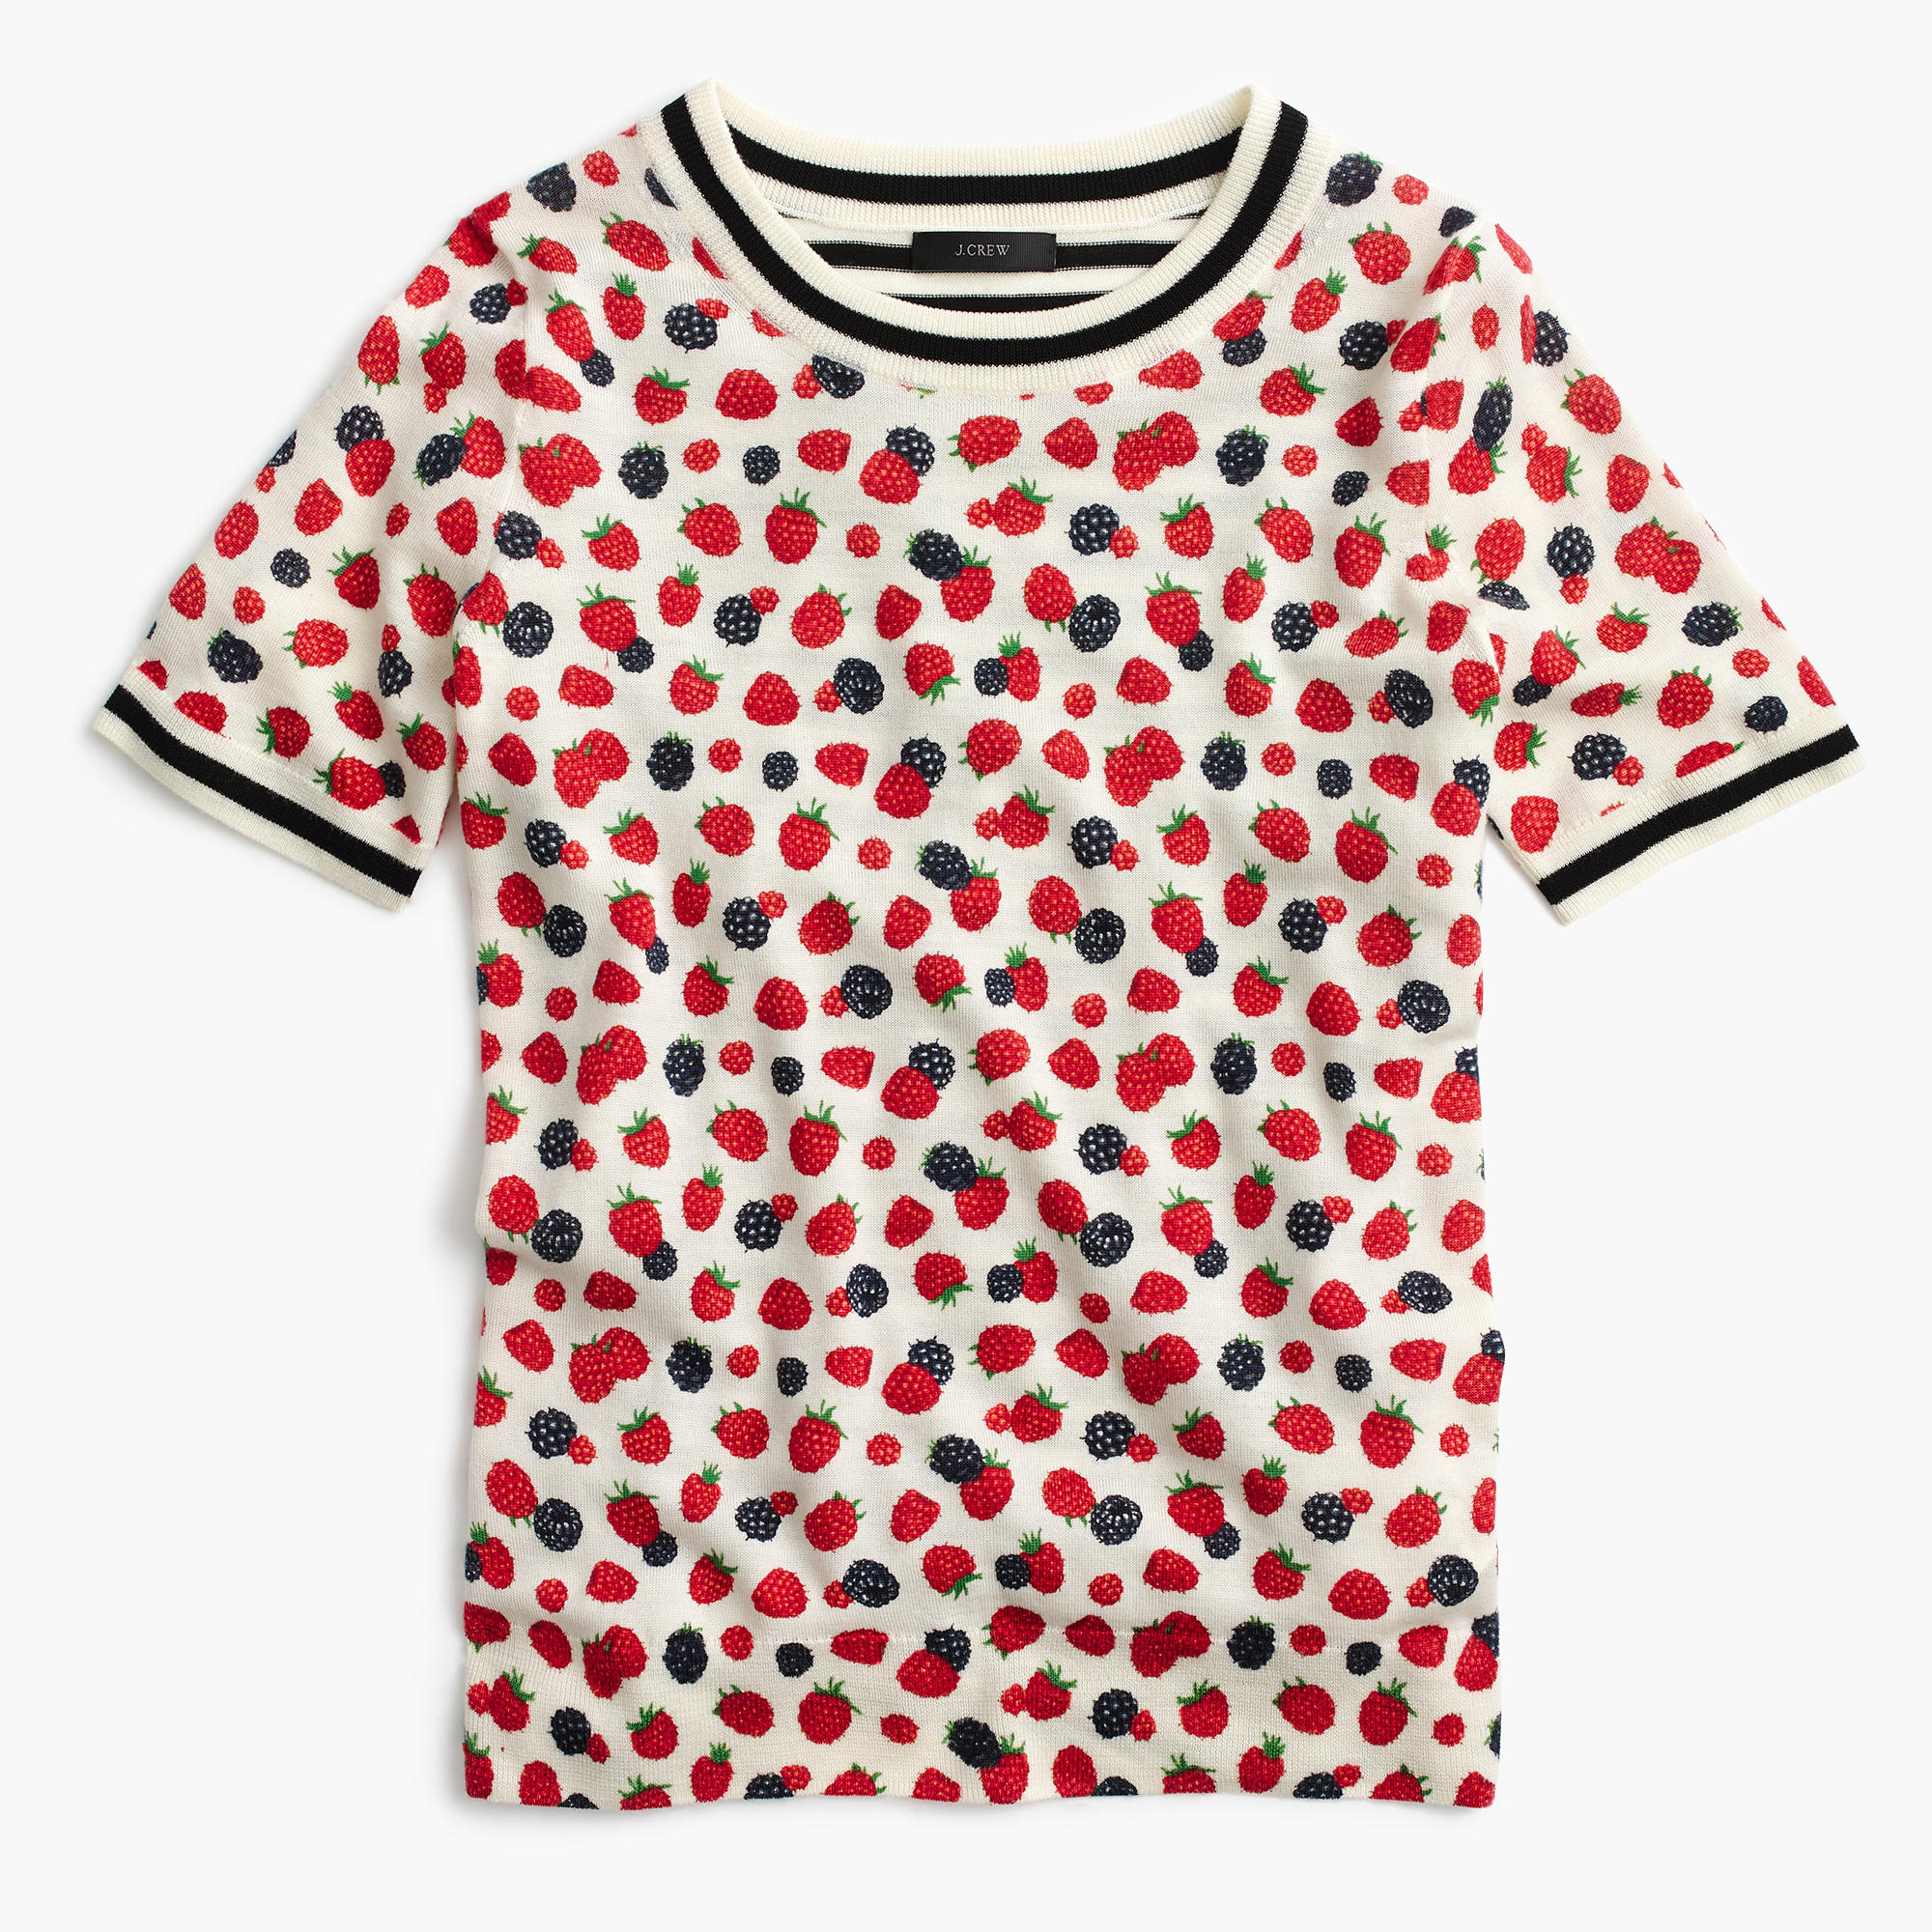 Tippi short-sleeve sweater in berry print : Women Pullovers | J.Crew